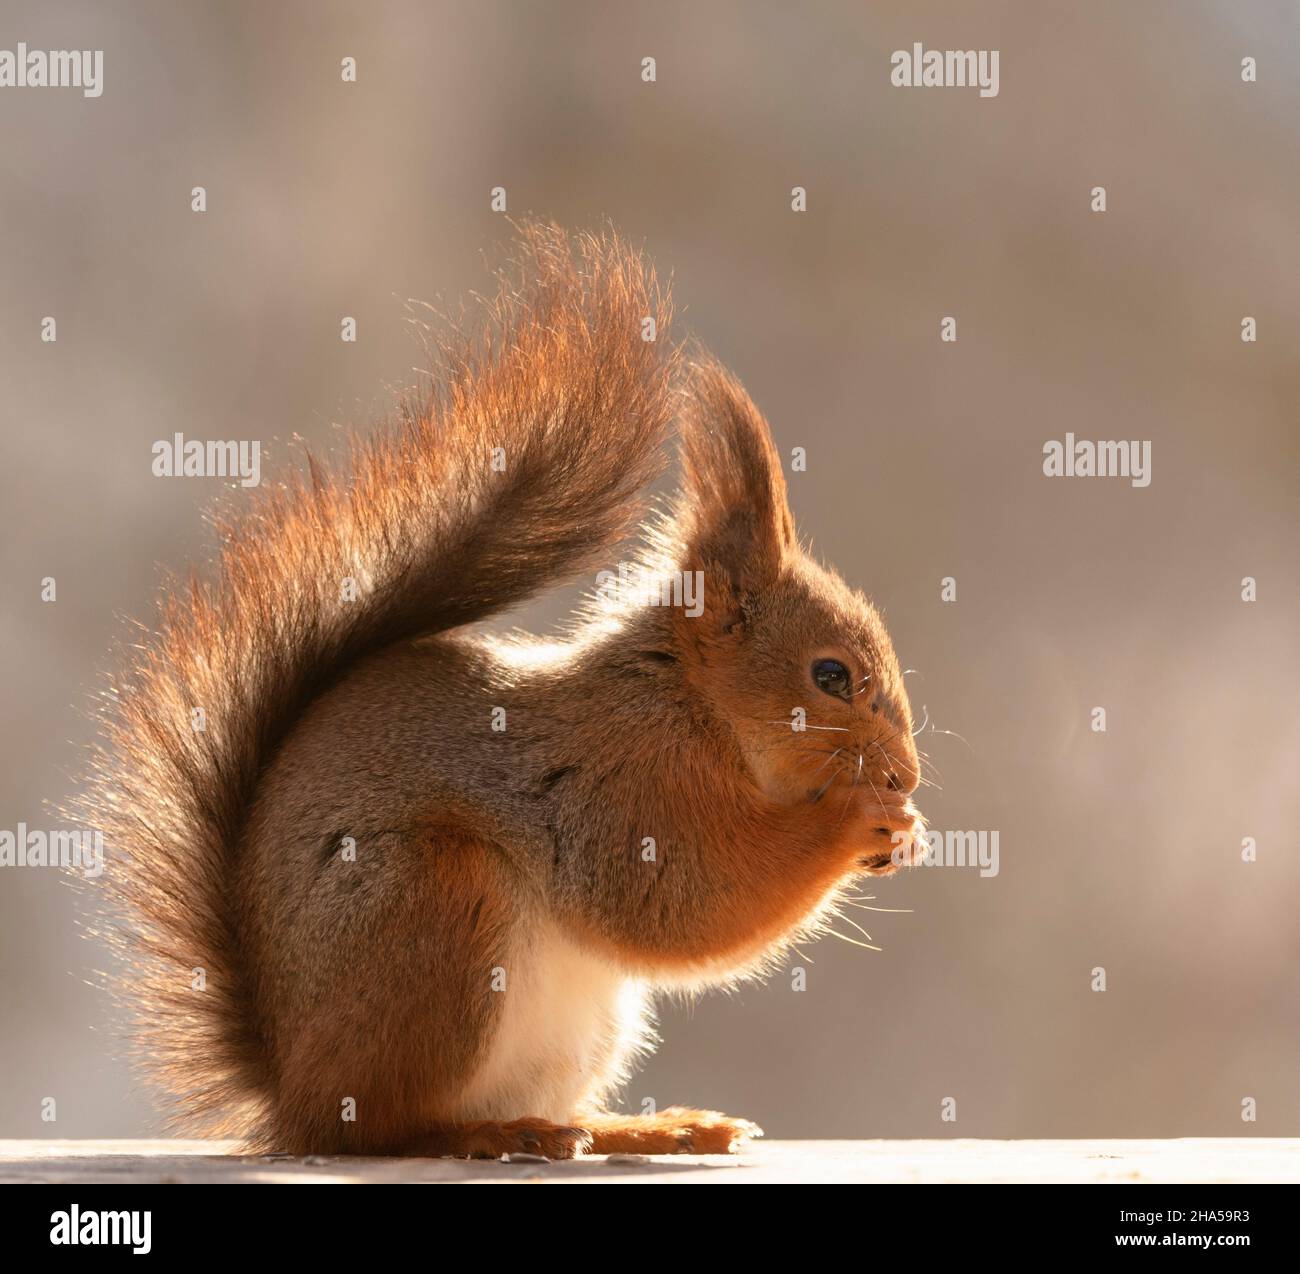 profile of an red squirrel who is looking to the right Stock Photo